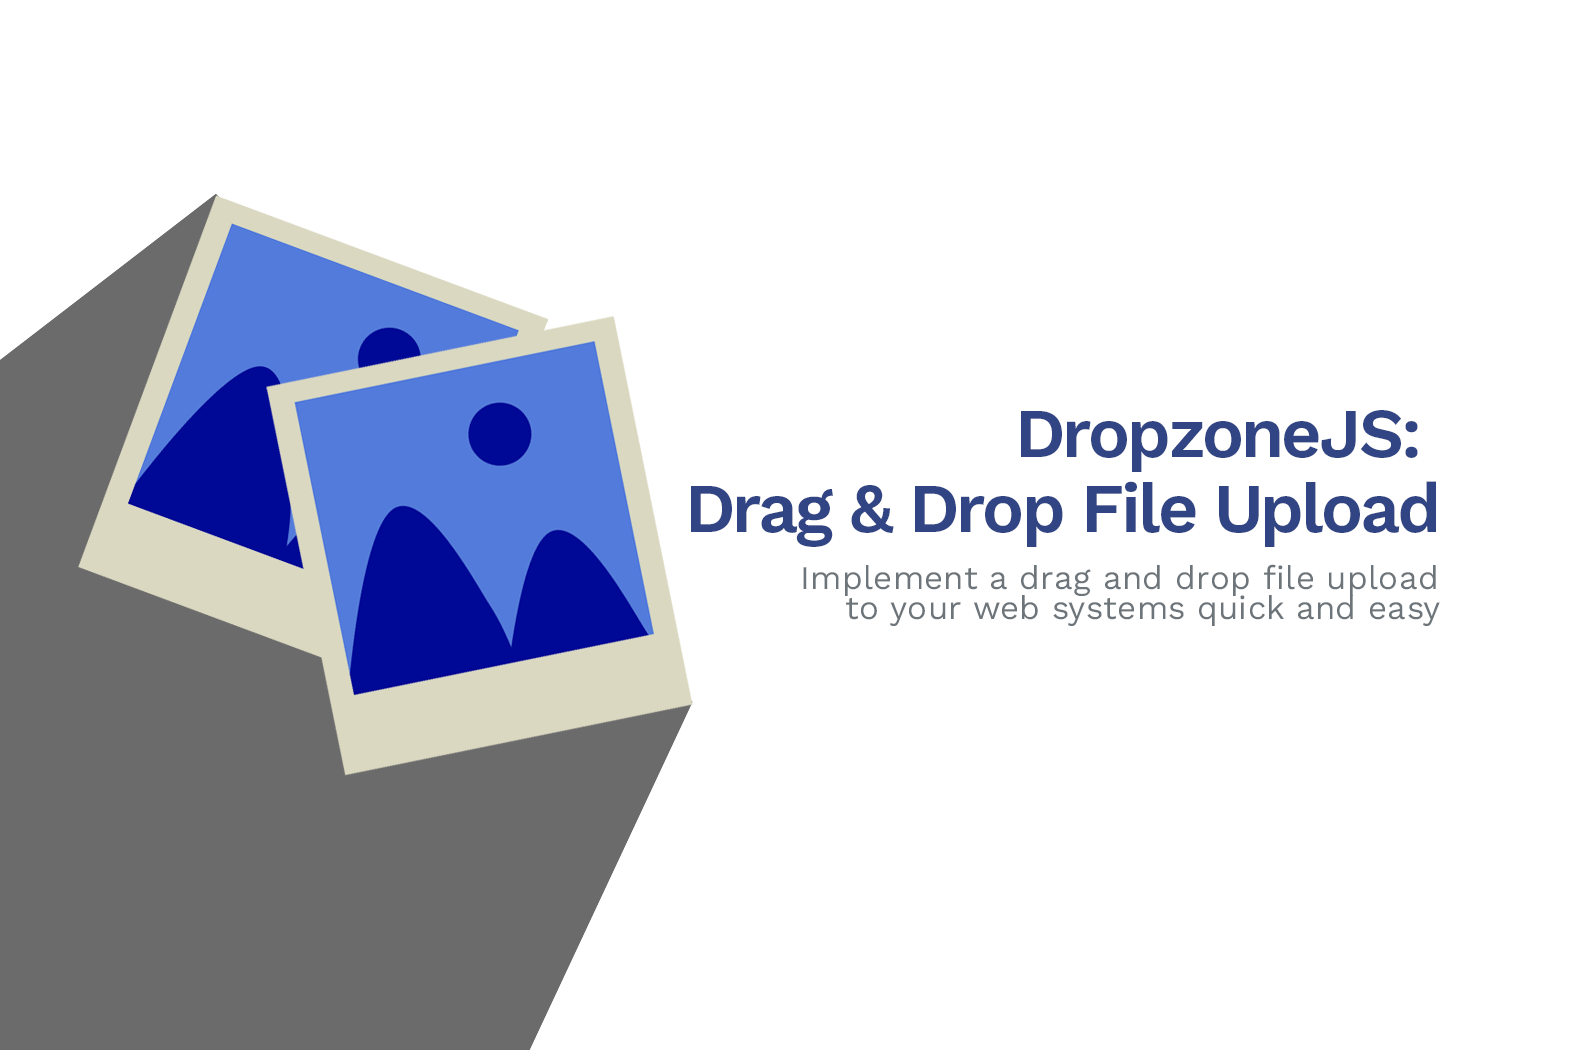 How to use Dropzone.js with PHP to Upload Images Only